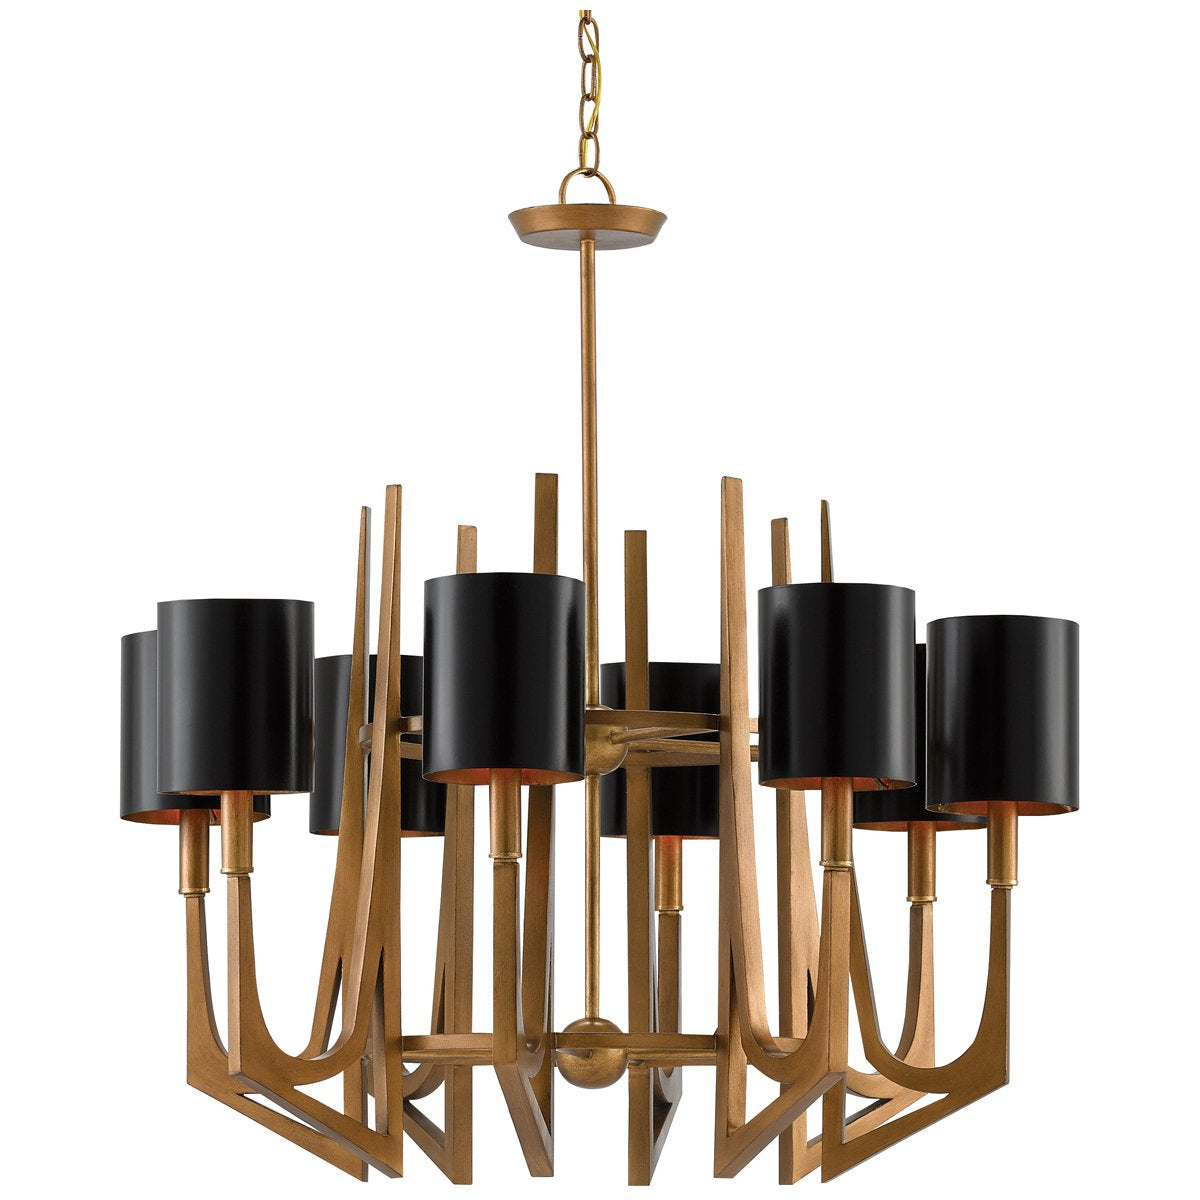 Currey and Company Umberto Chandelier